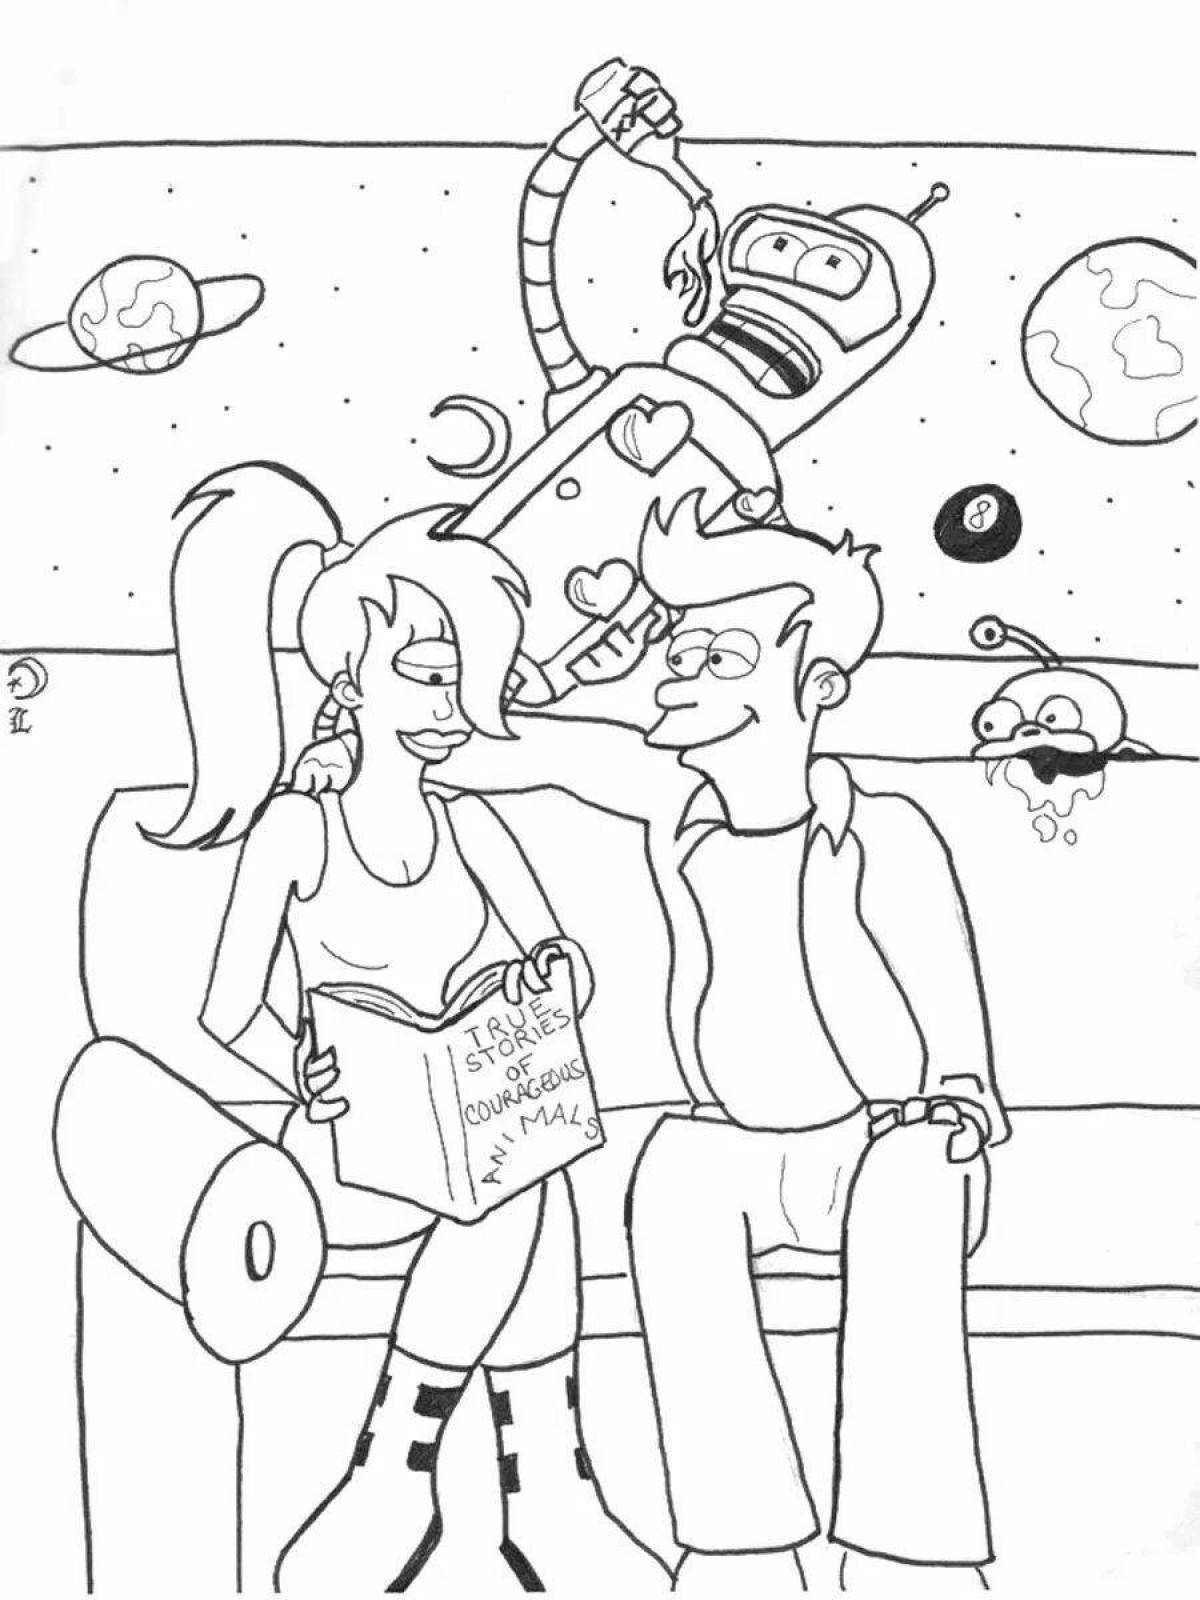 Bender's playful coloring page